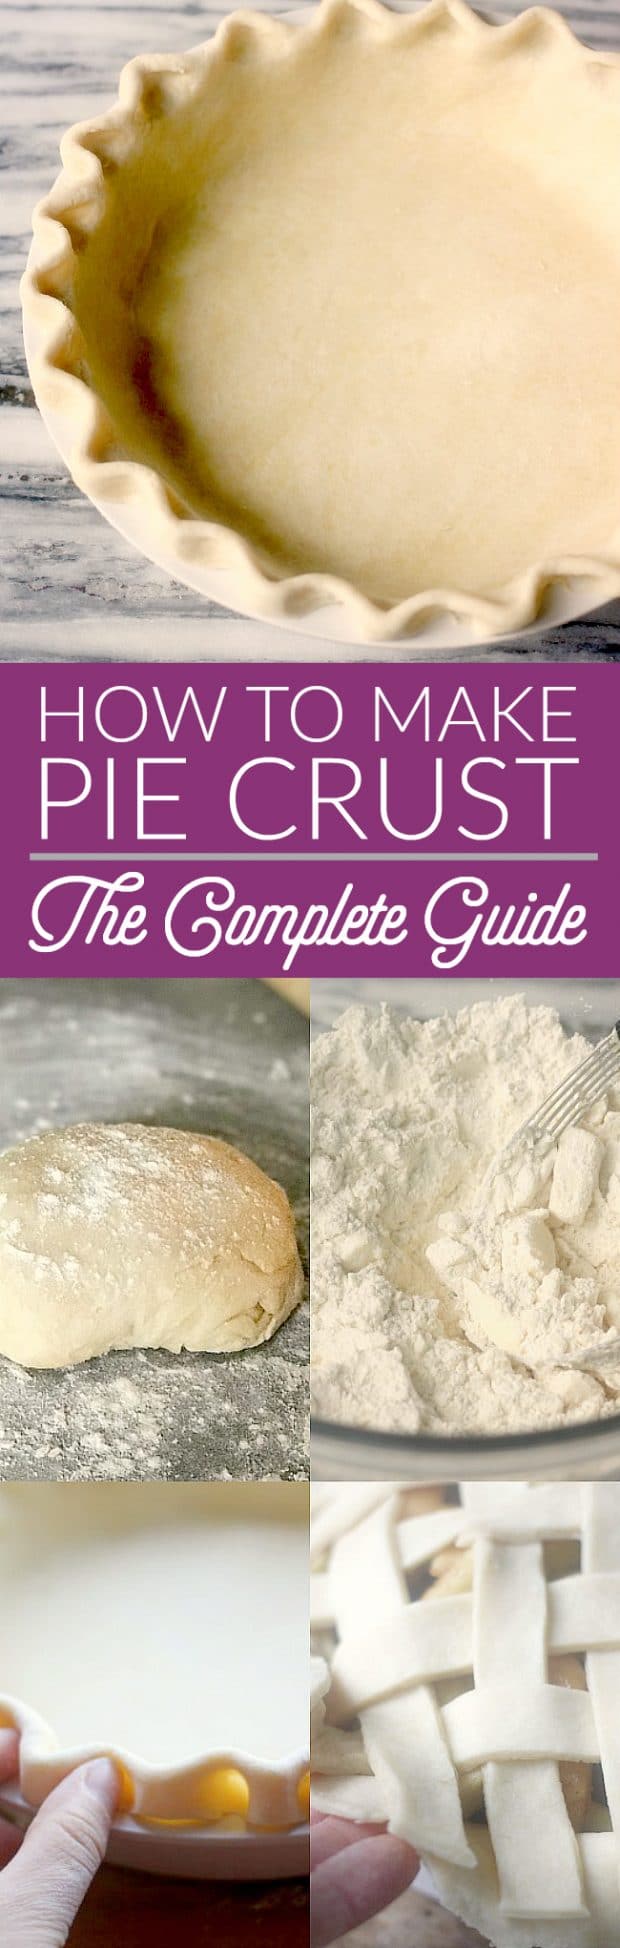 Understanding all of the details for how to make pie crust is key for proper execution and success. Making a pie crust that is tender and flaky is not as complicated as it can seem, and these tips will help build your pie crust making confidence!